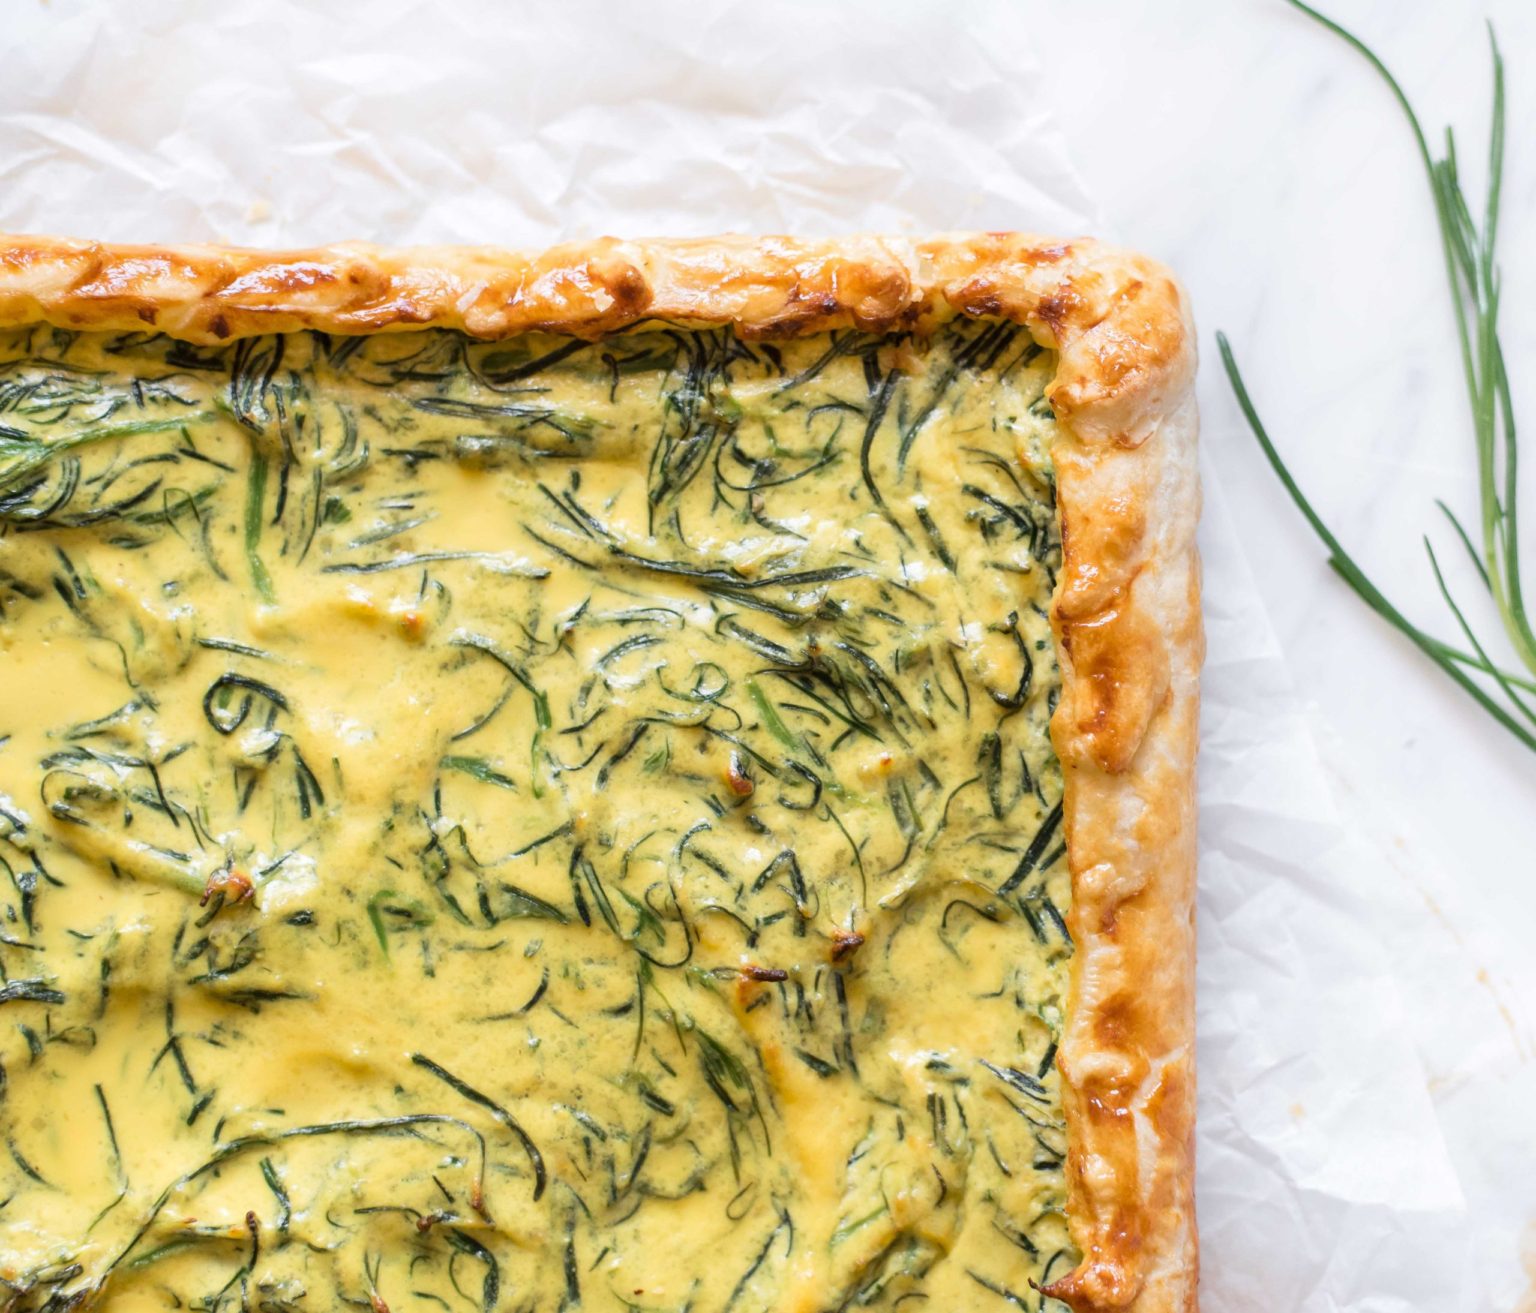 Picnics and a Spring Quiche with Agretti. - Very EATalian